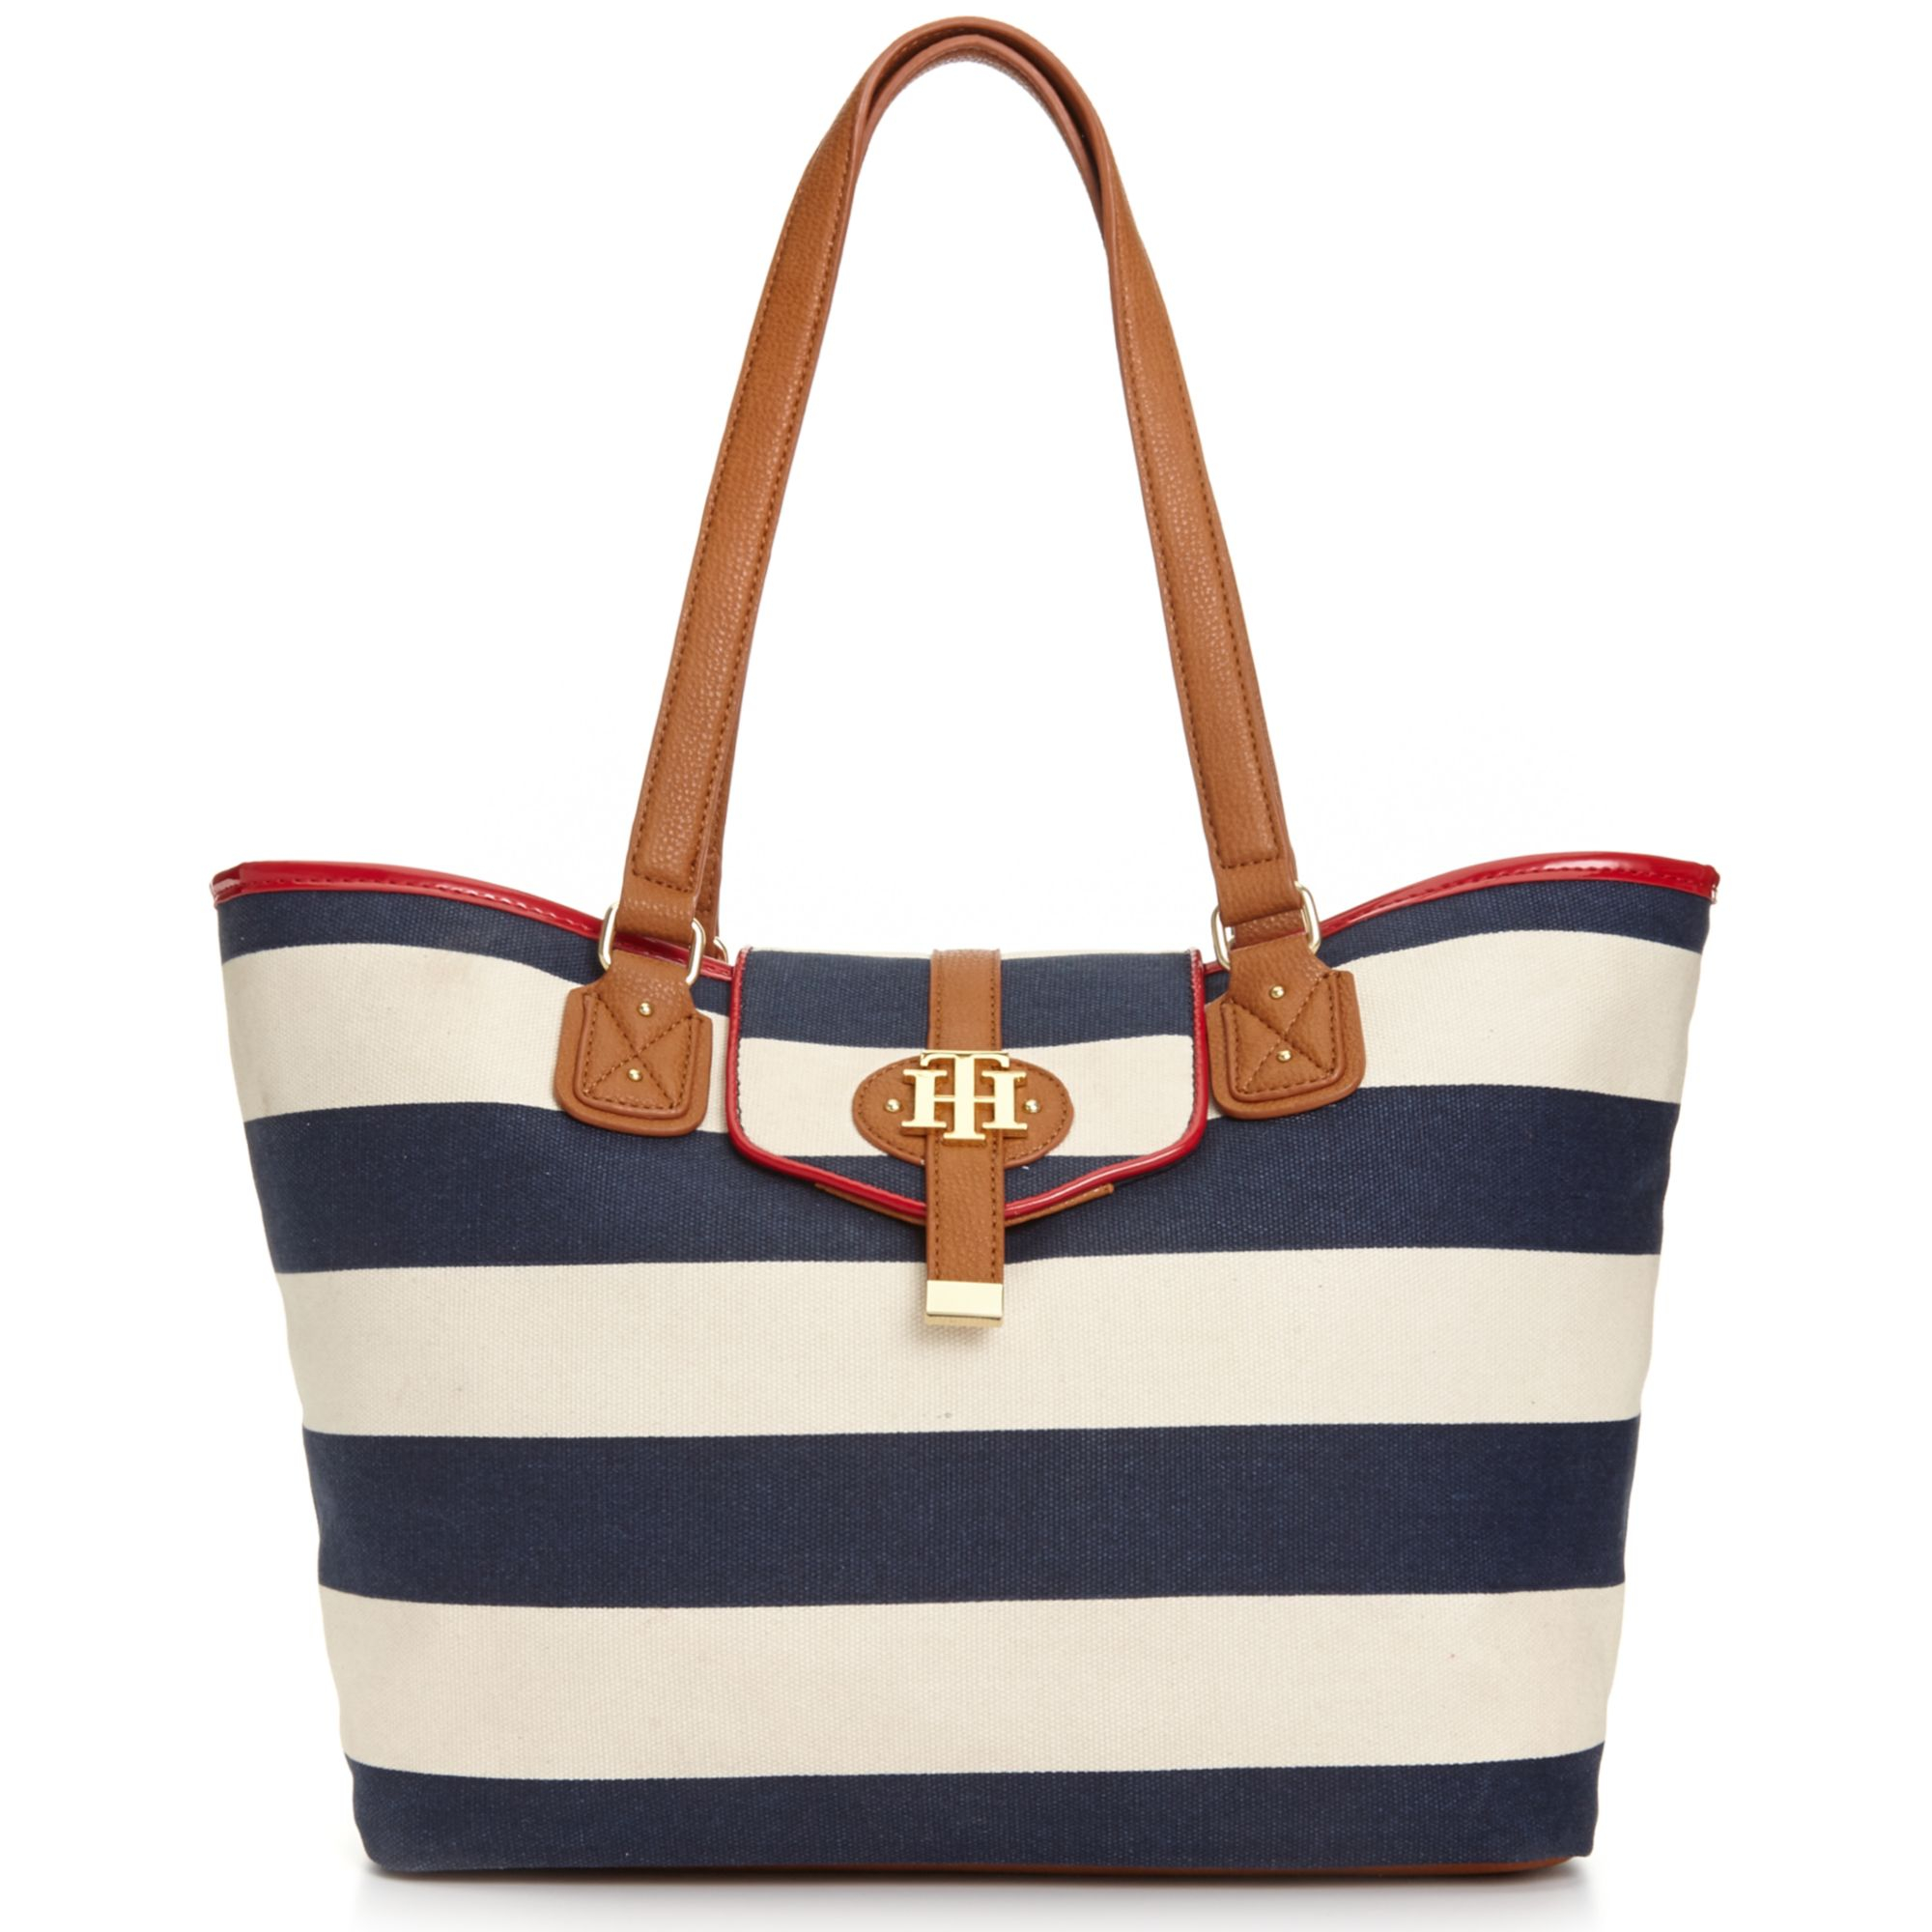 Tommy Hilfiger Th Keepsake Tote in Natural - Lyst